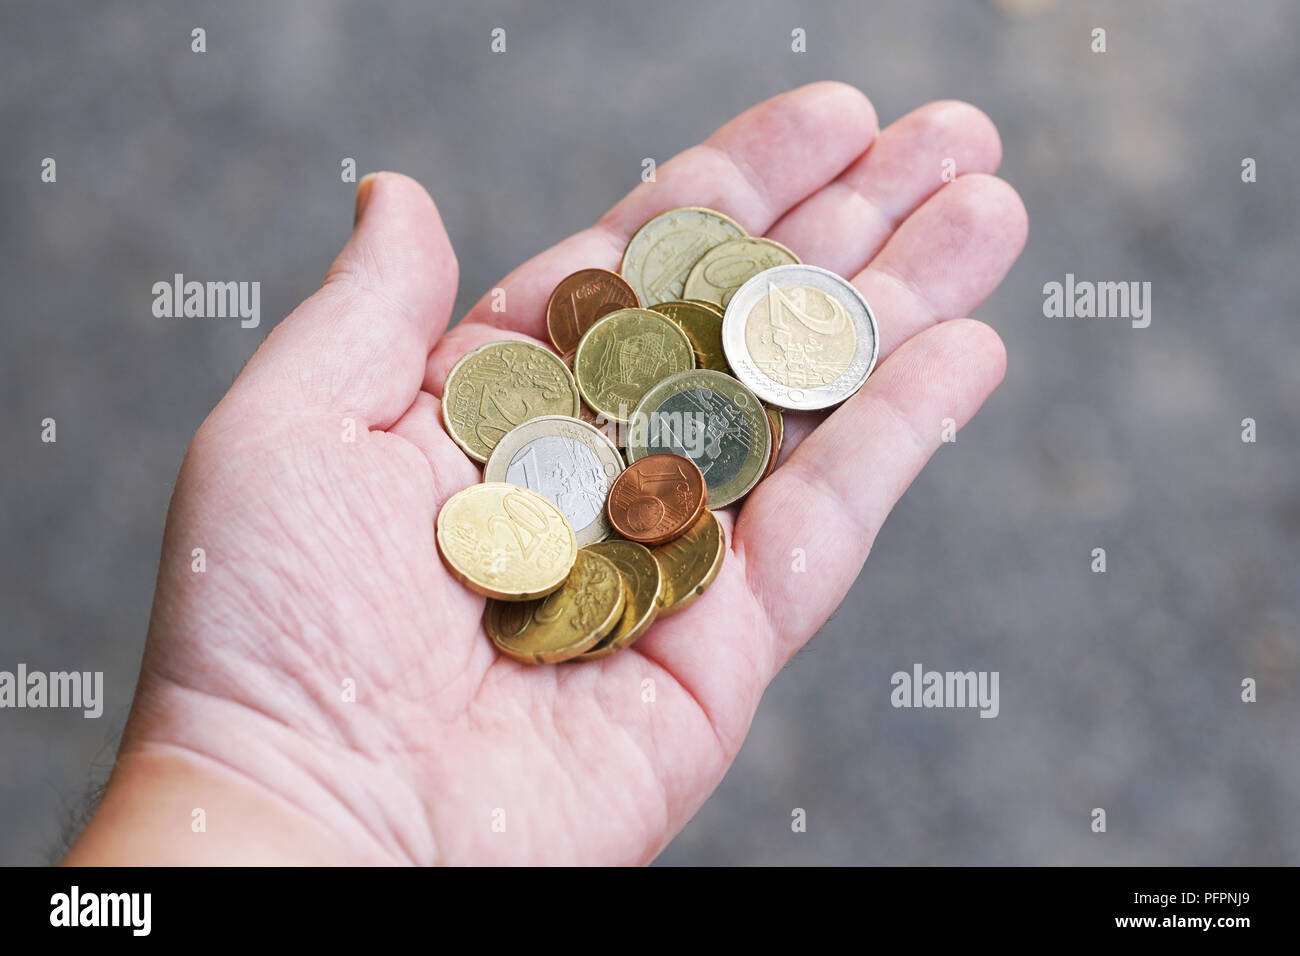 handful of small loose pocket change euro cent coins in palm of hand, money finance currency concept Stock Photo